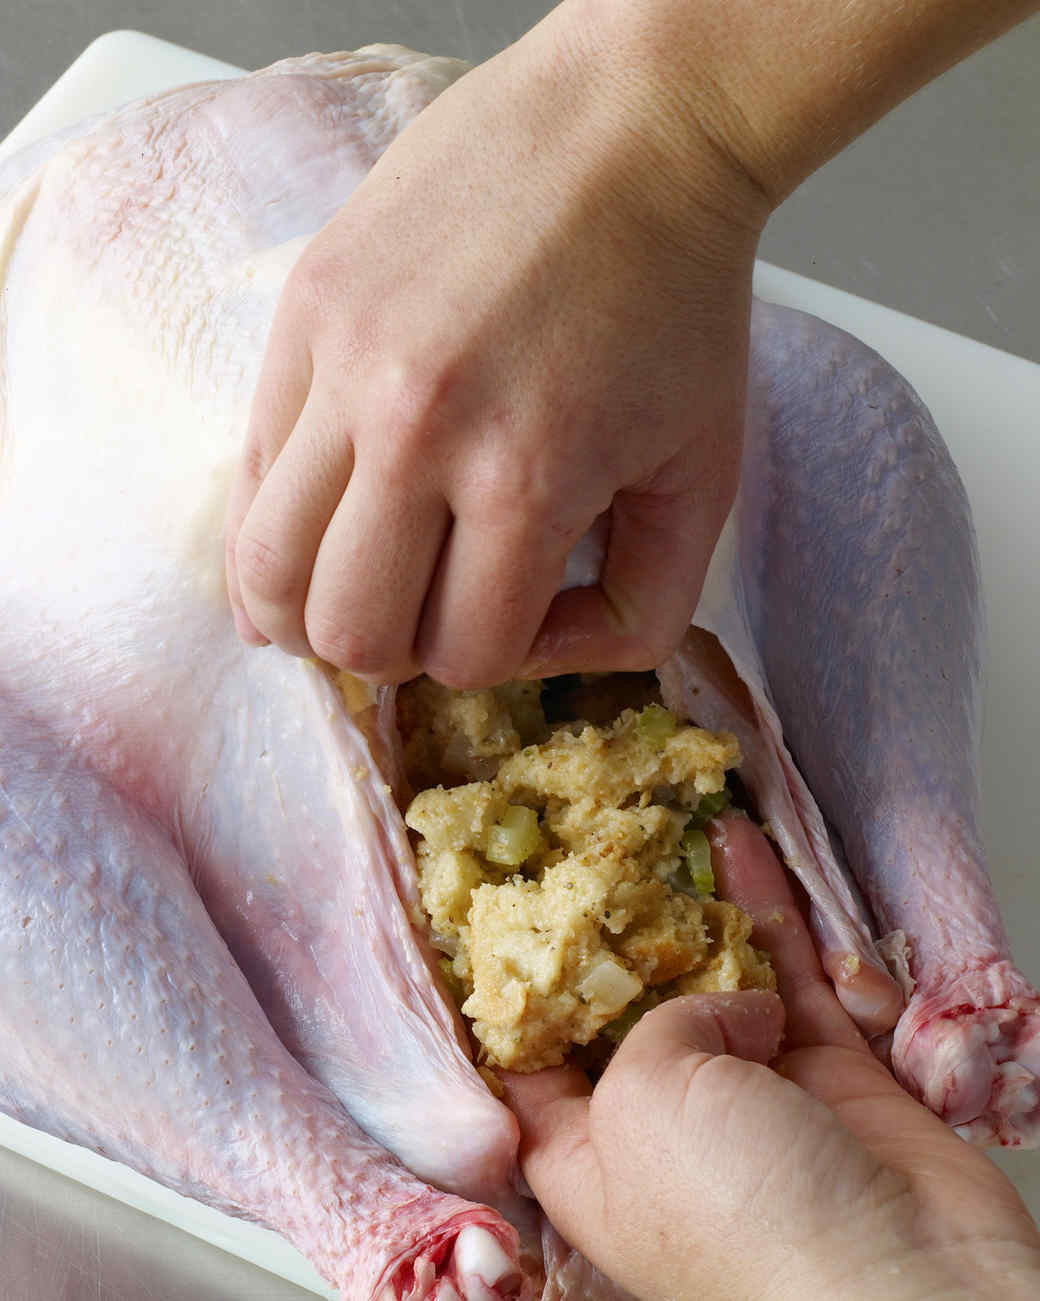 Preparing A Turkey For Thanksgiving
 How to Stuff and Prepare Your Thanksgiving Turkey